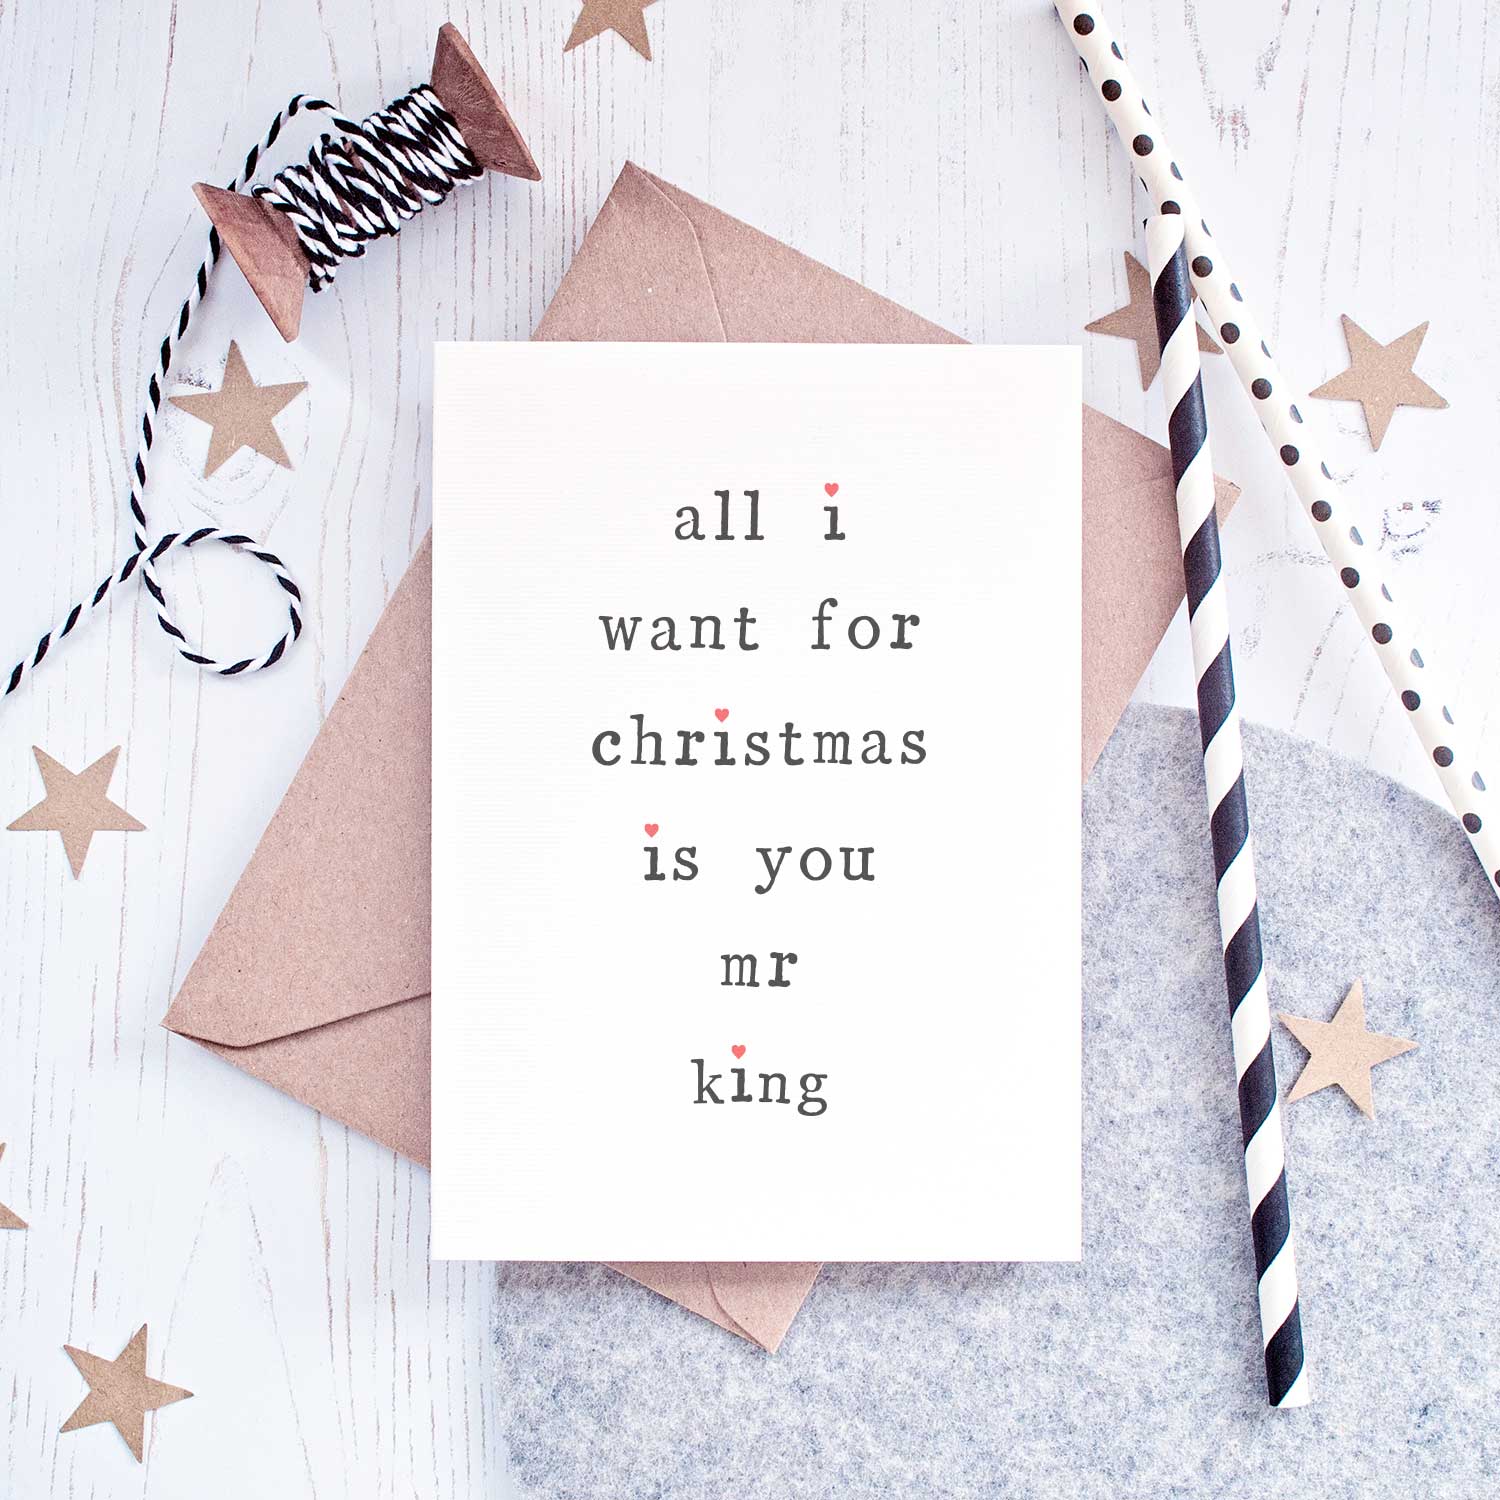 Personalised 'All I want' Christmas Card